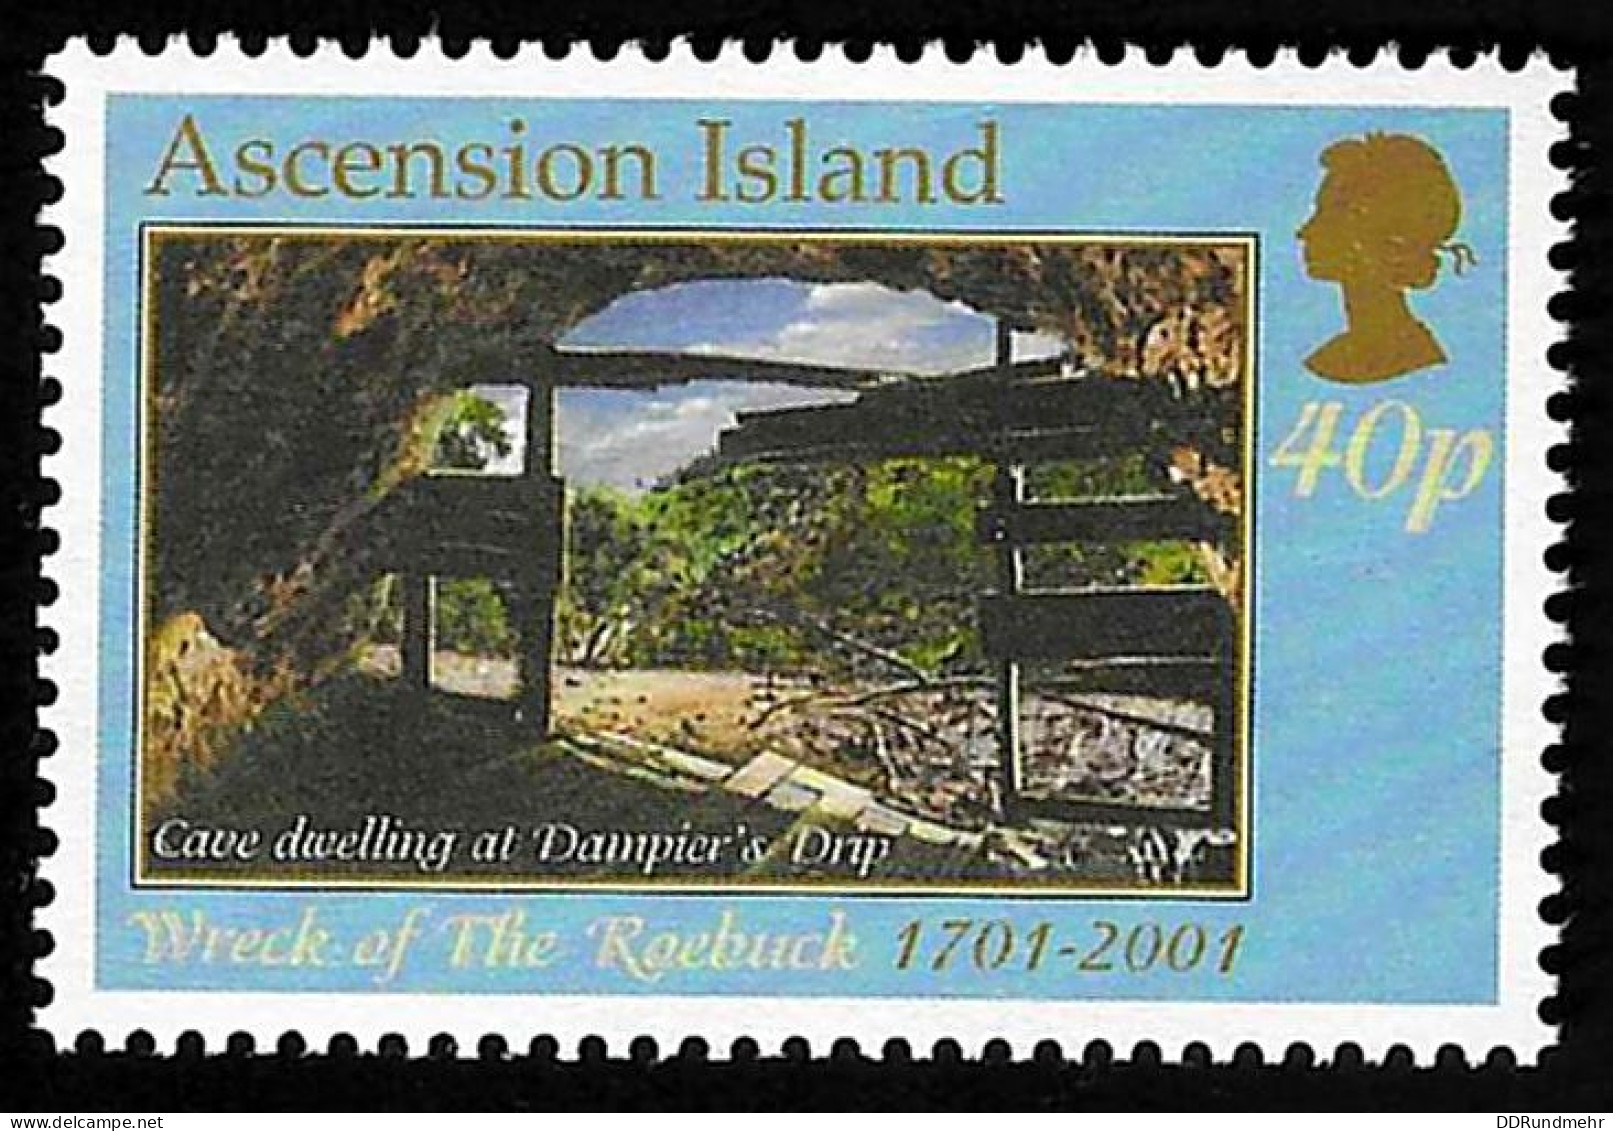 2001 Cave Dwelling Michel AC 840 Stamp Number AC 771 Yvert Et Tellier AC 781 Stanley Gibbons AC 817 Xx MNH - Ascensión